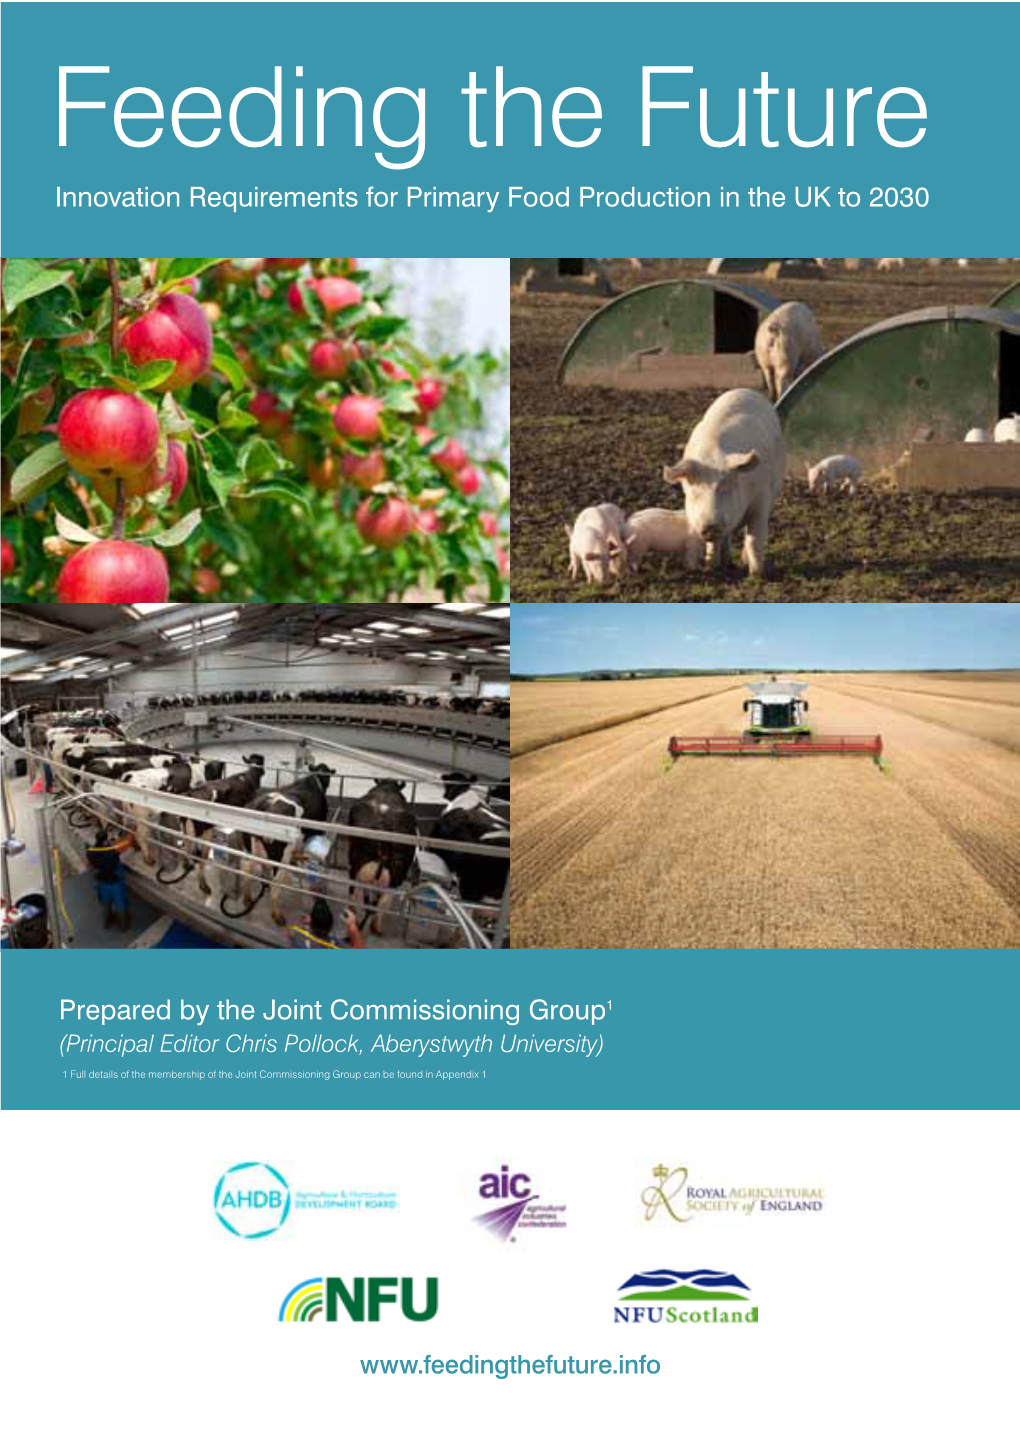 Feeding the Future Innovation Requirements for Primary Food Production in the UK to 2030